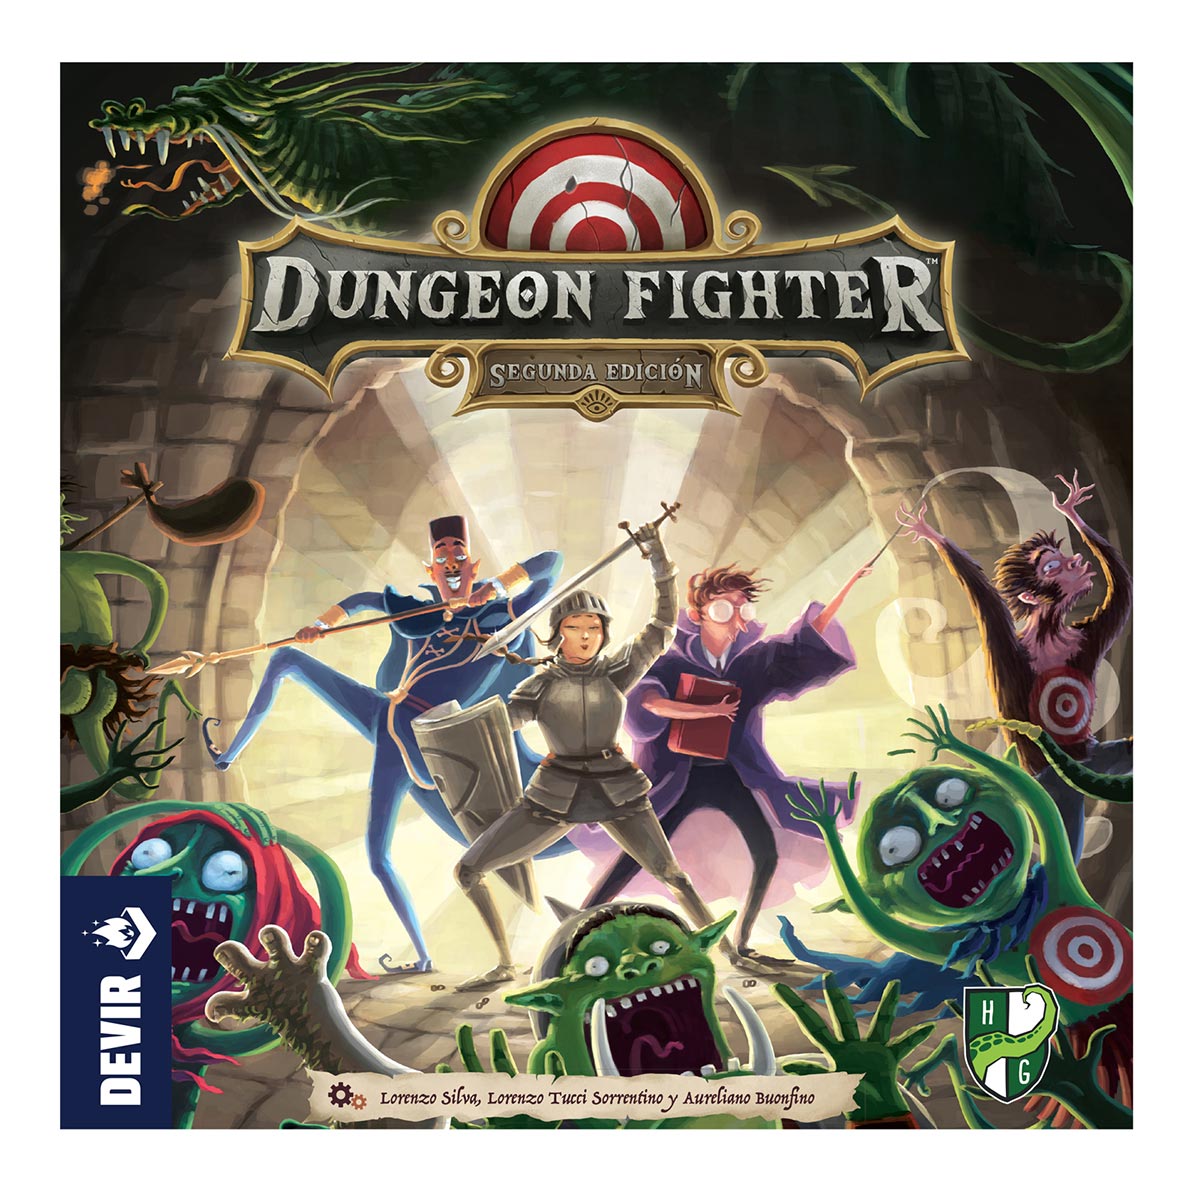 DungeonFighter-FrontBox-1200×1200